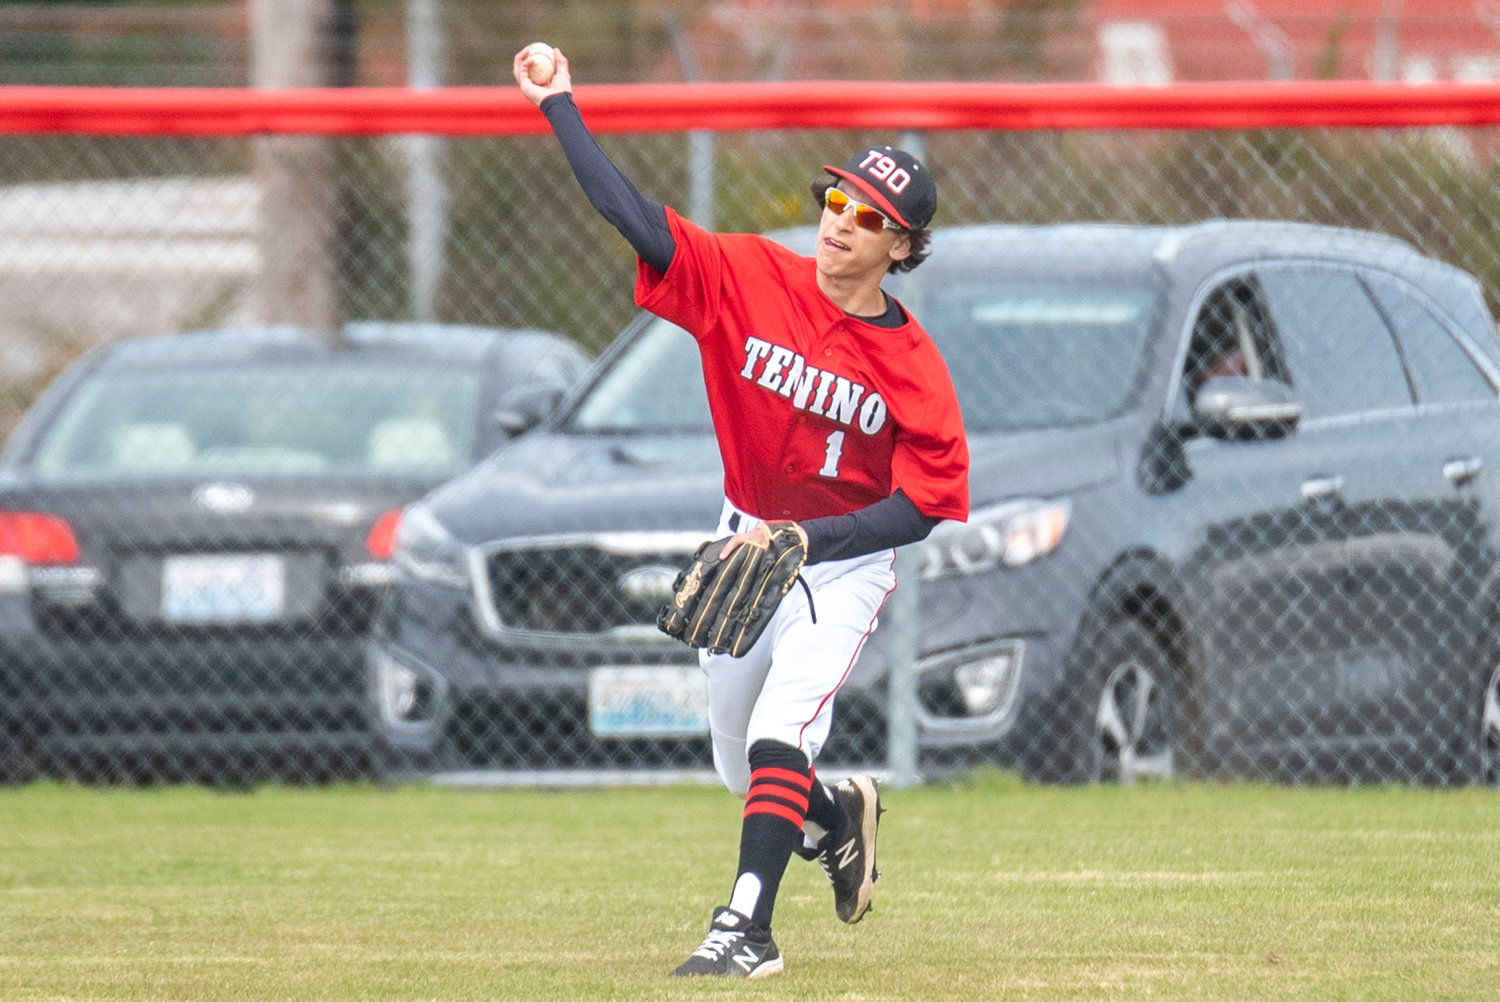 Tenino's Kaden Sayamnet makes a throw from the outfield during a home game against Elma on April 29.